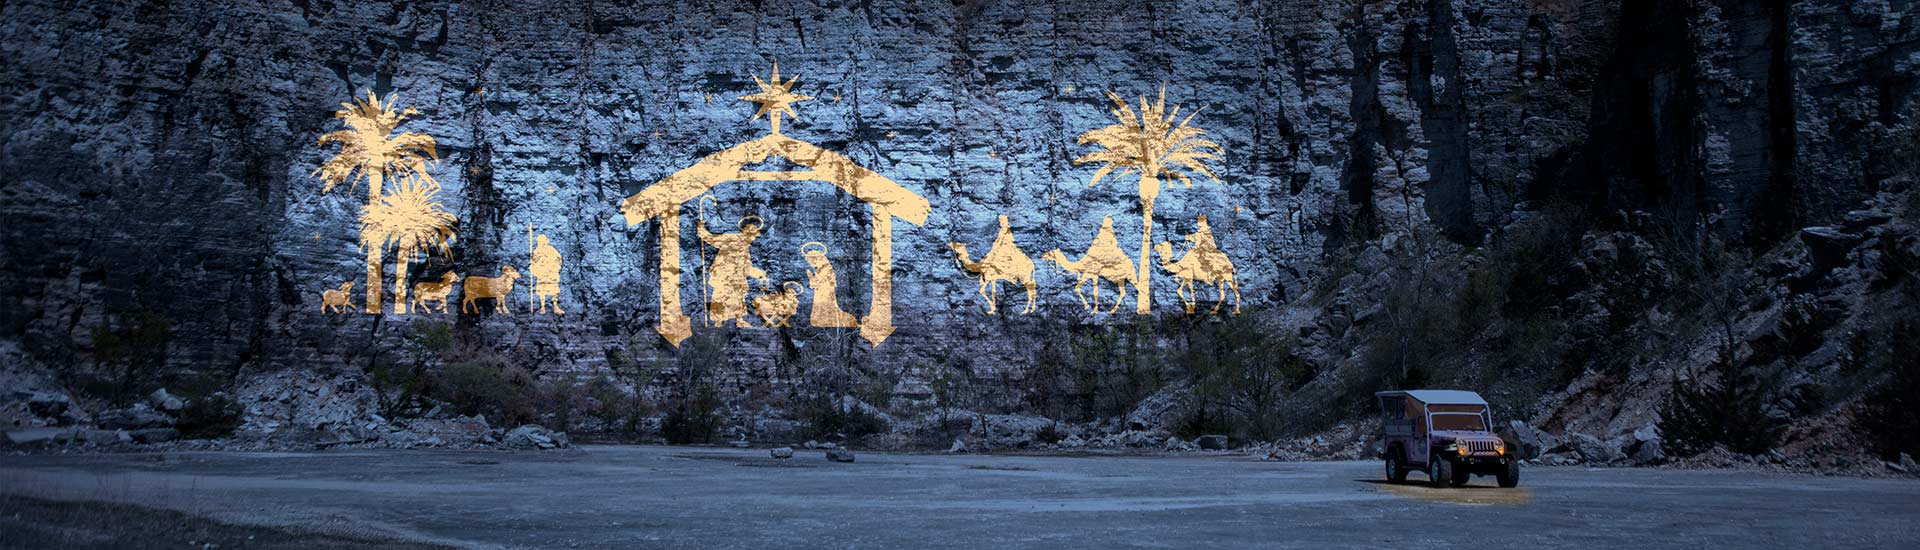 Christmas manger and nativity scened illuminated against the cliff face of Baird Mountain during Pink Jeep Tours Branson Christmas tour.